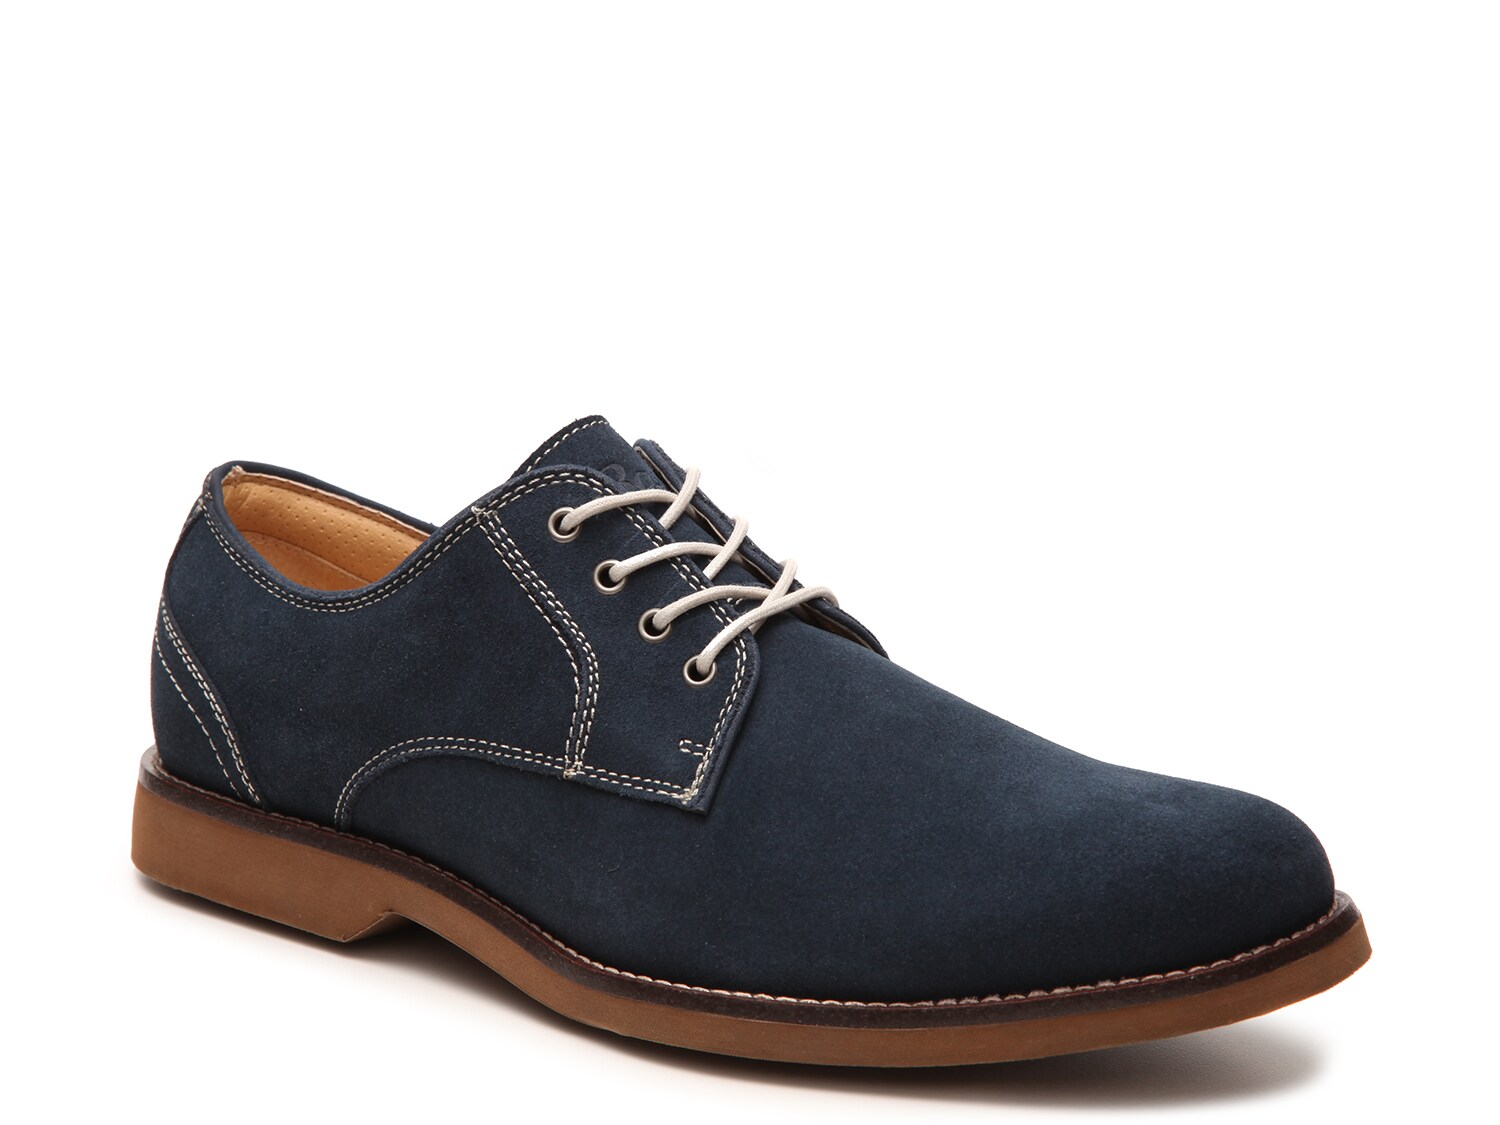 G.H. Bass & Co. Proctor Oxford - Free Shipping | DSW